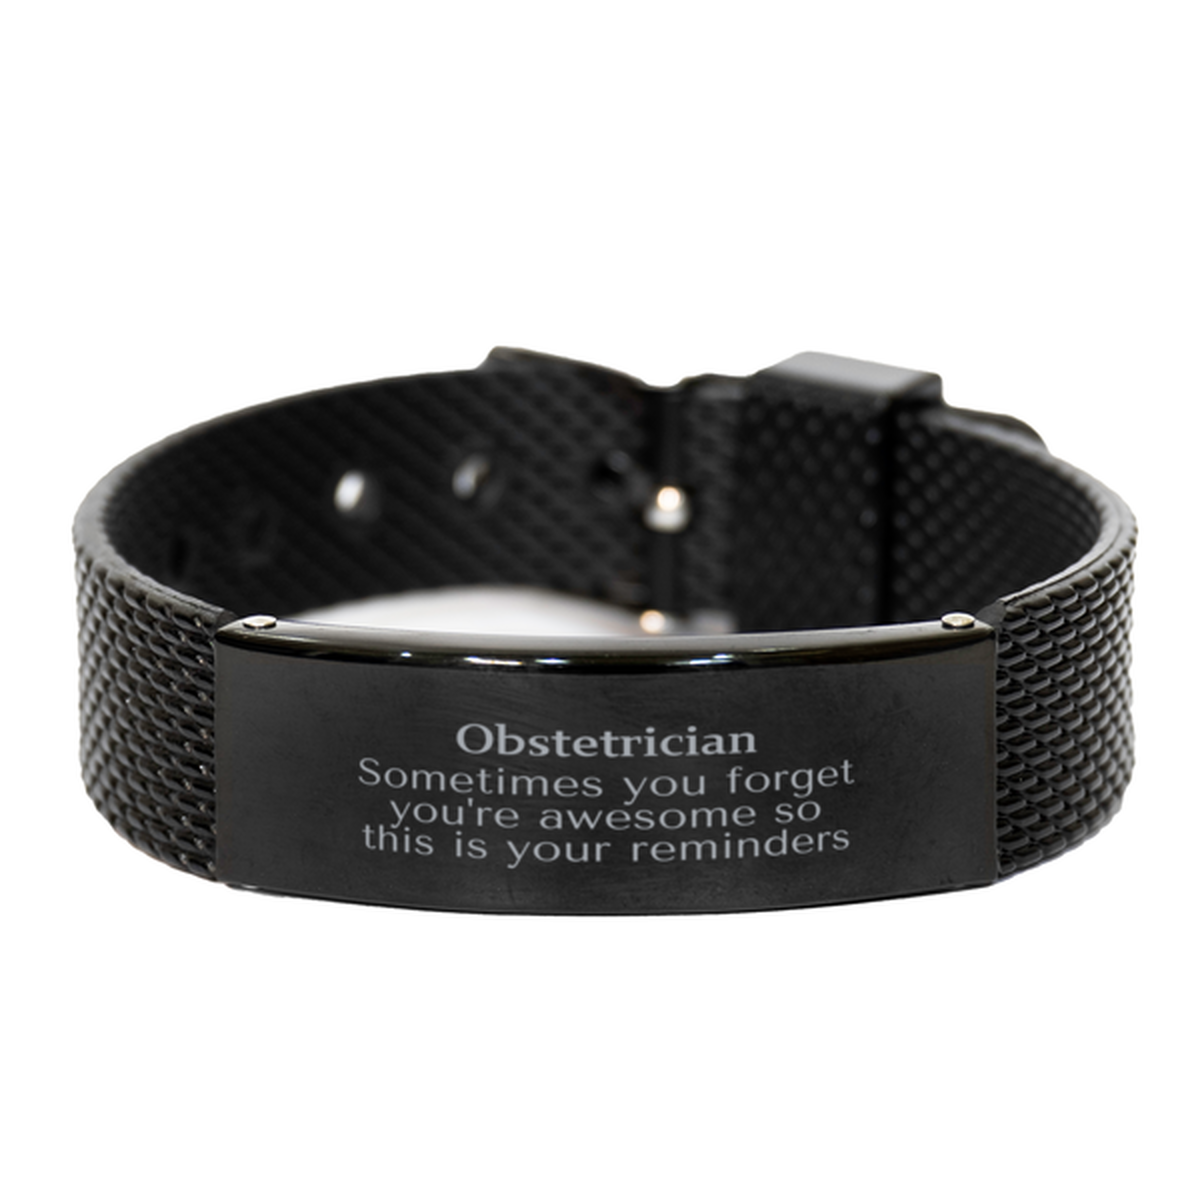 Sentimental Obstetrician Black Shark Mesh Bracelet, Obstetrician Sometimes you forget you're awesome so this is your reminders, Graduation Christmas Birthday Gifts for Obstetrician, Men, Women, Coworkers